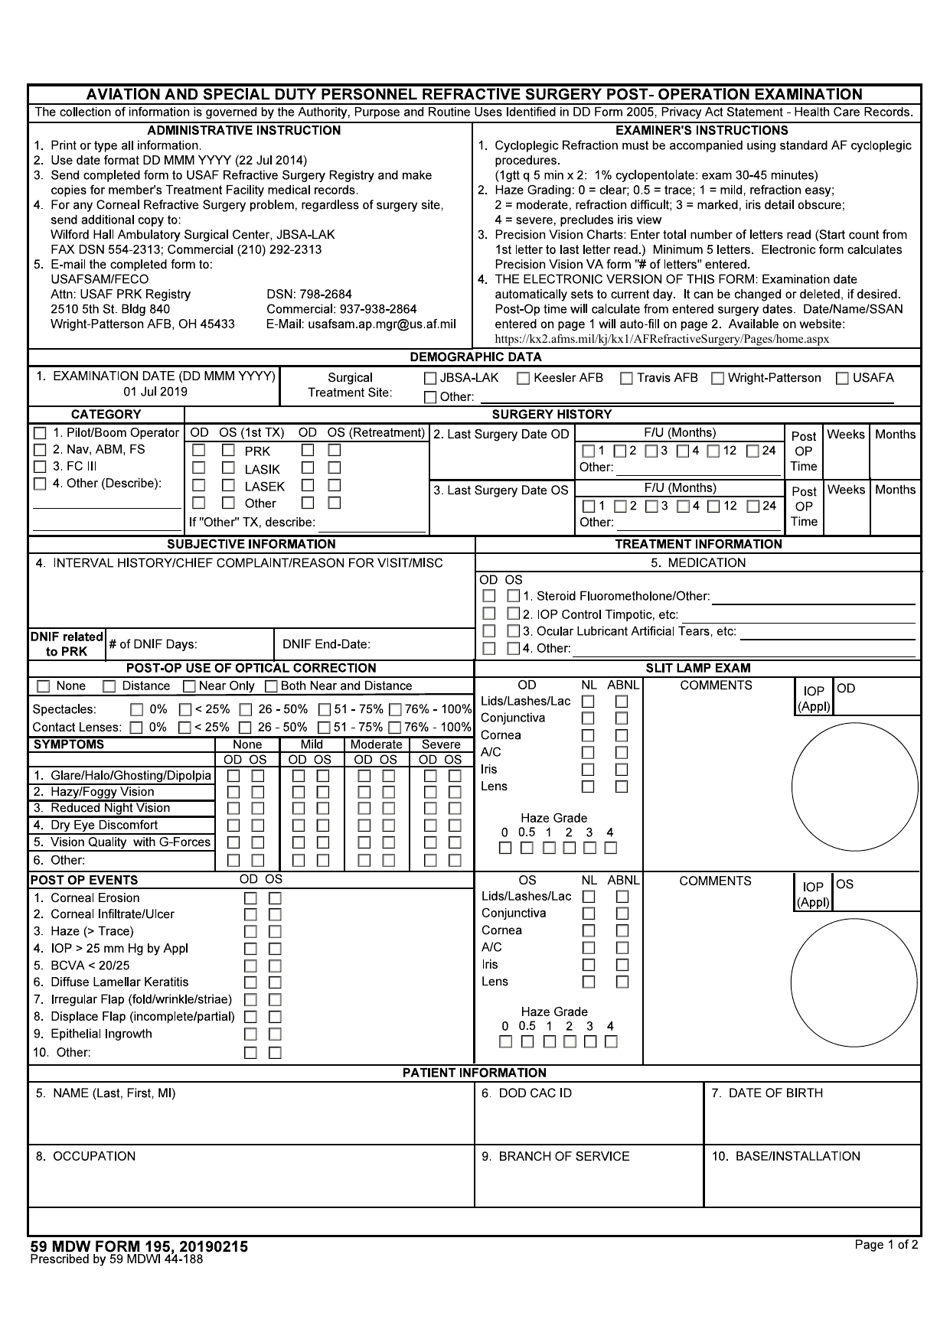 59 MDW Form 195 Aviation and Special Duty Personnel Refractive Surgery Post-operation Examination, Page 1